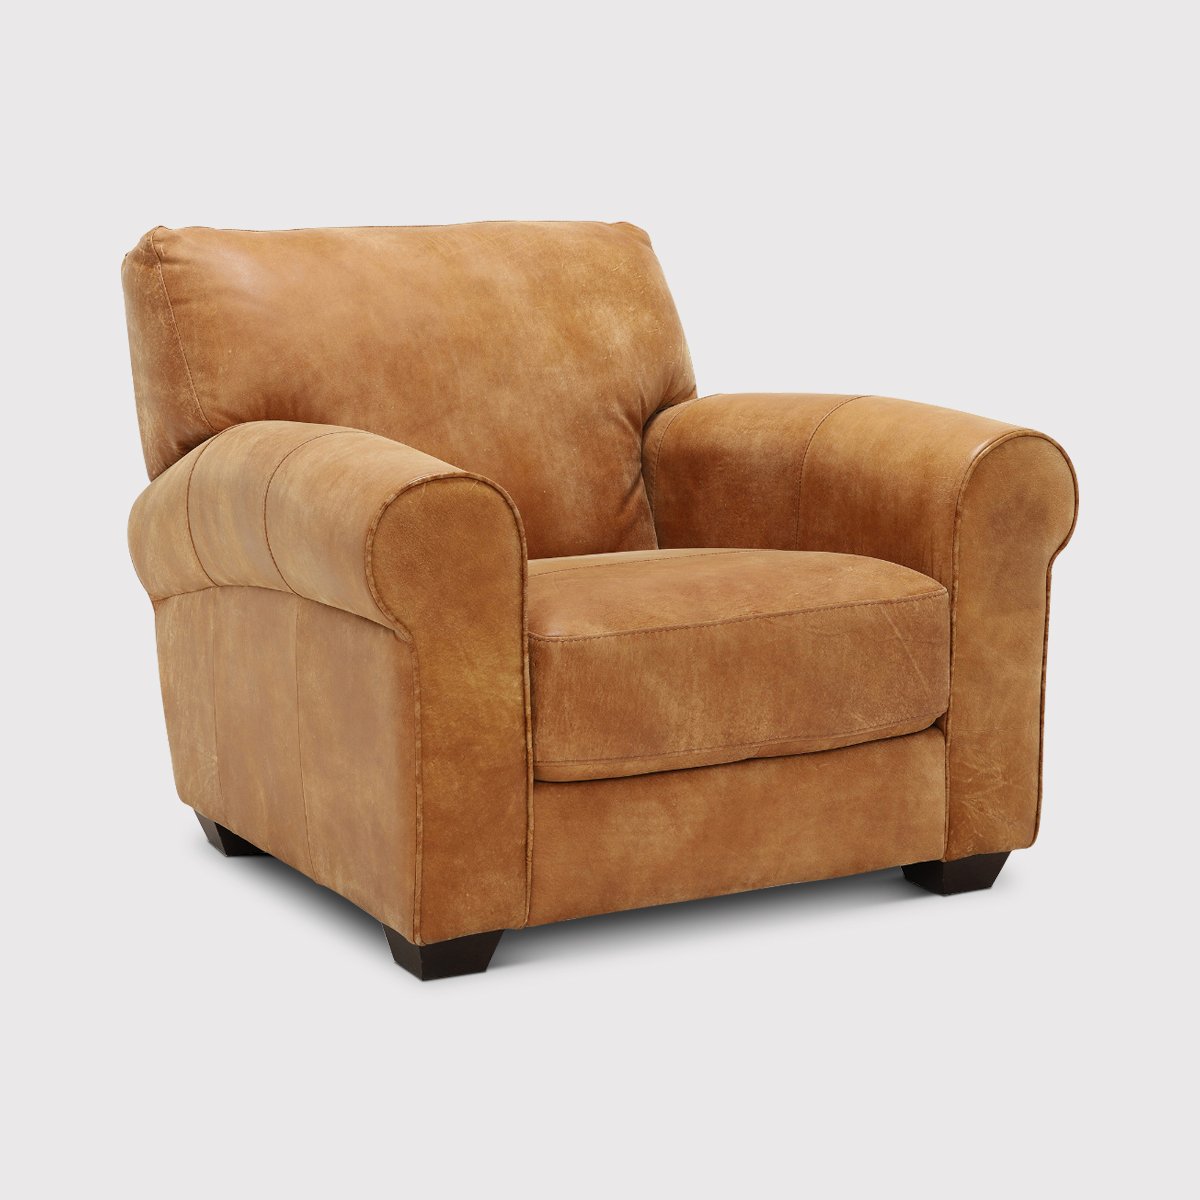 Houston Armchair, Brown Leather | Barker & Stonehouse